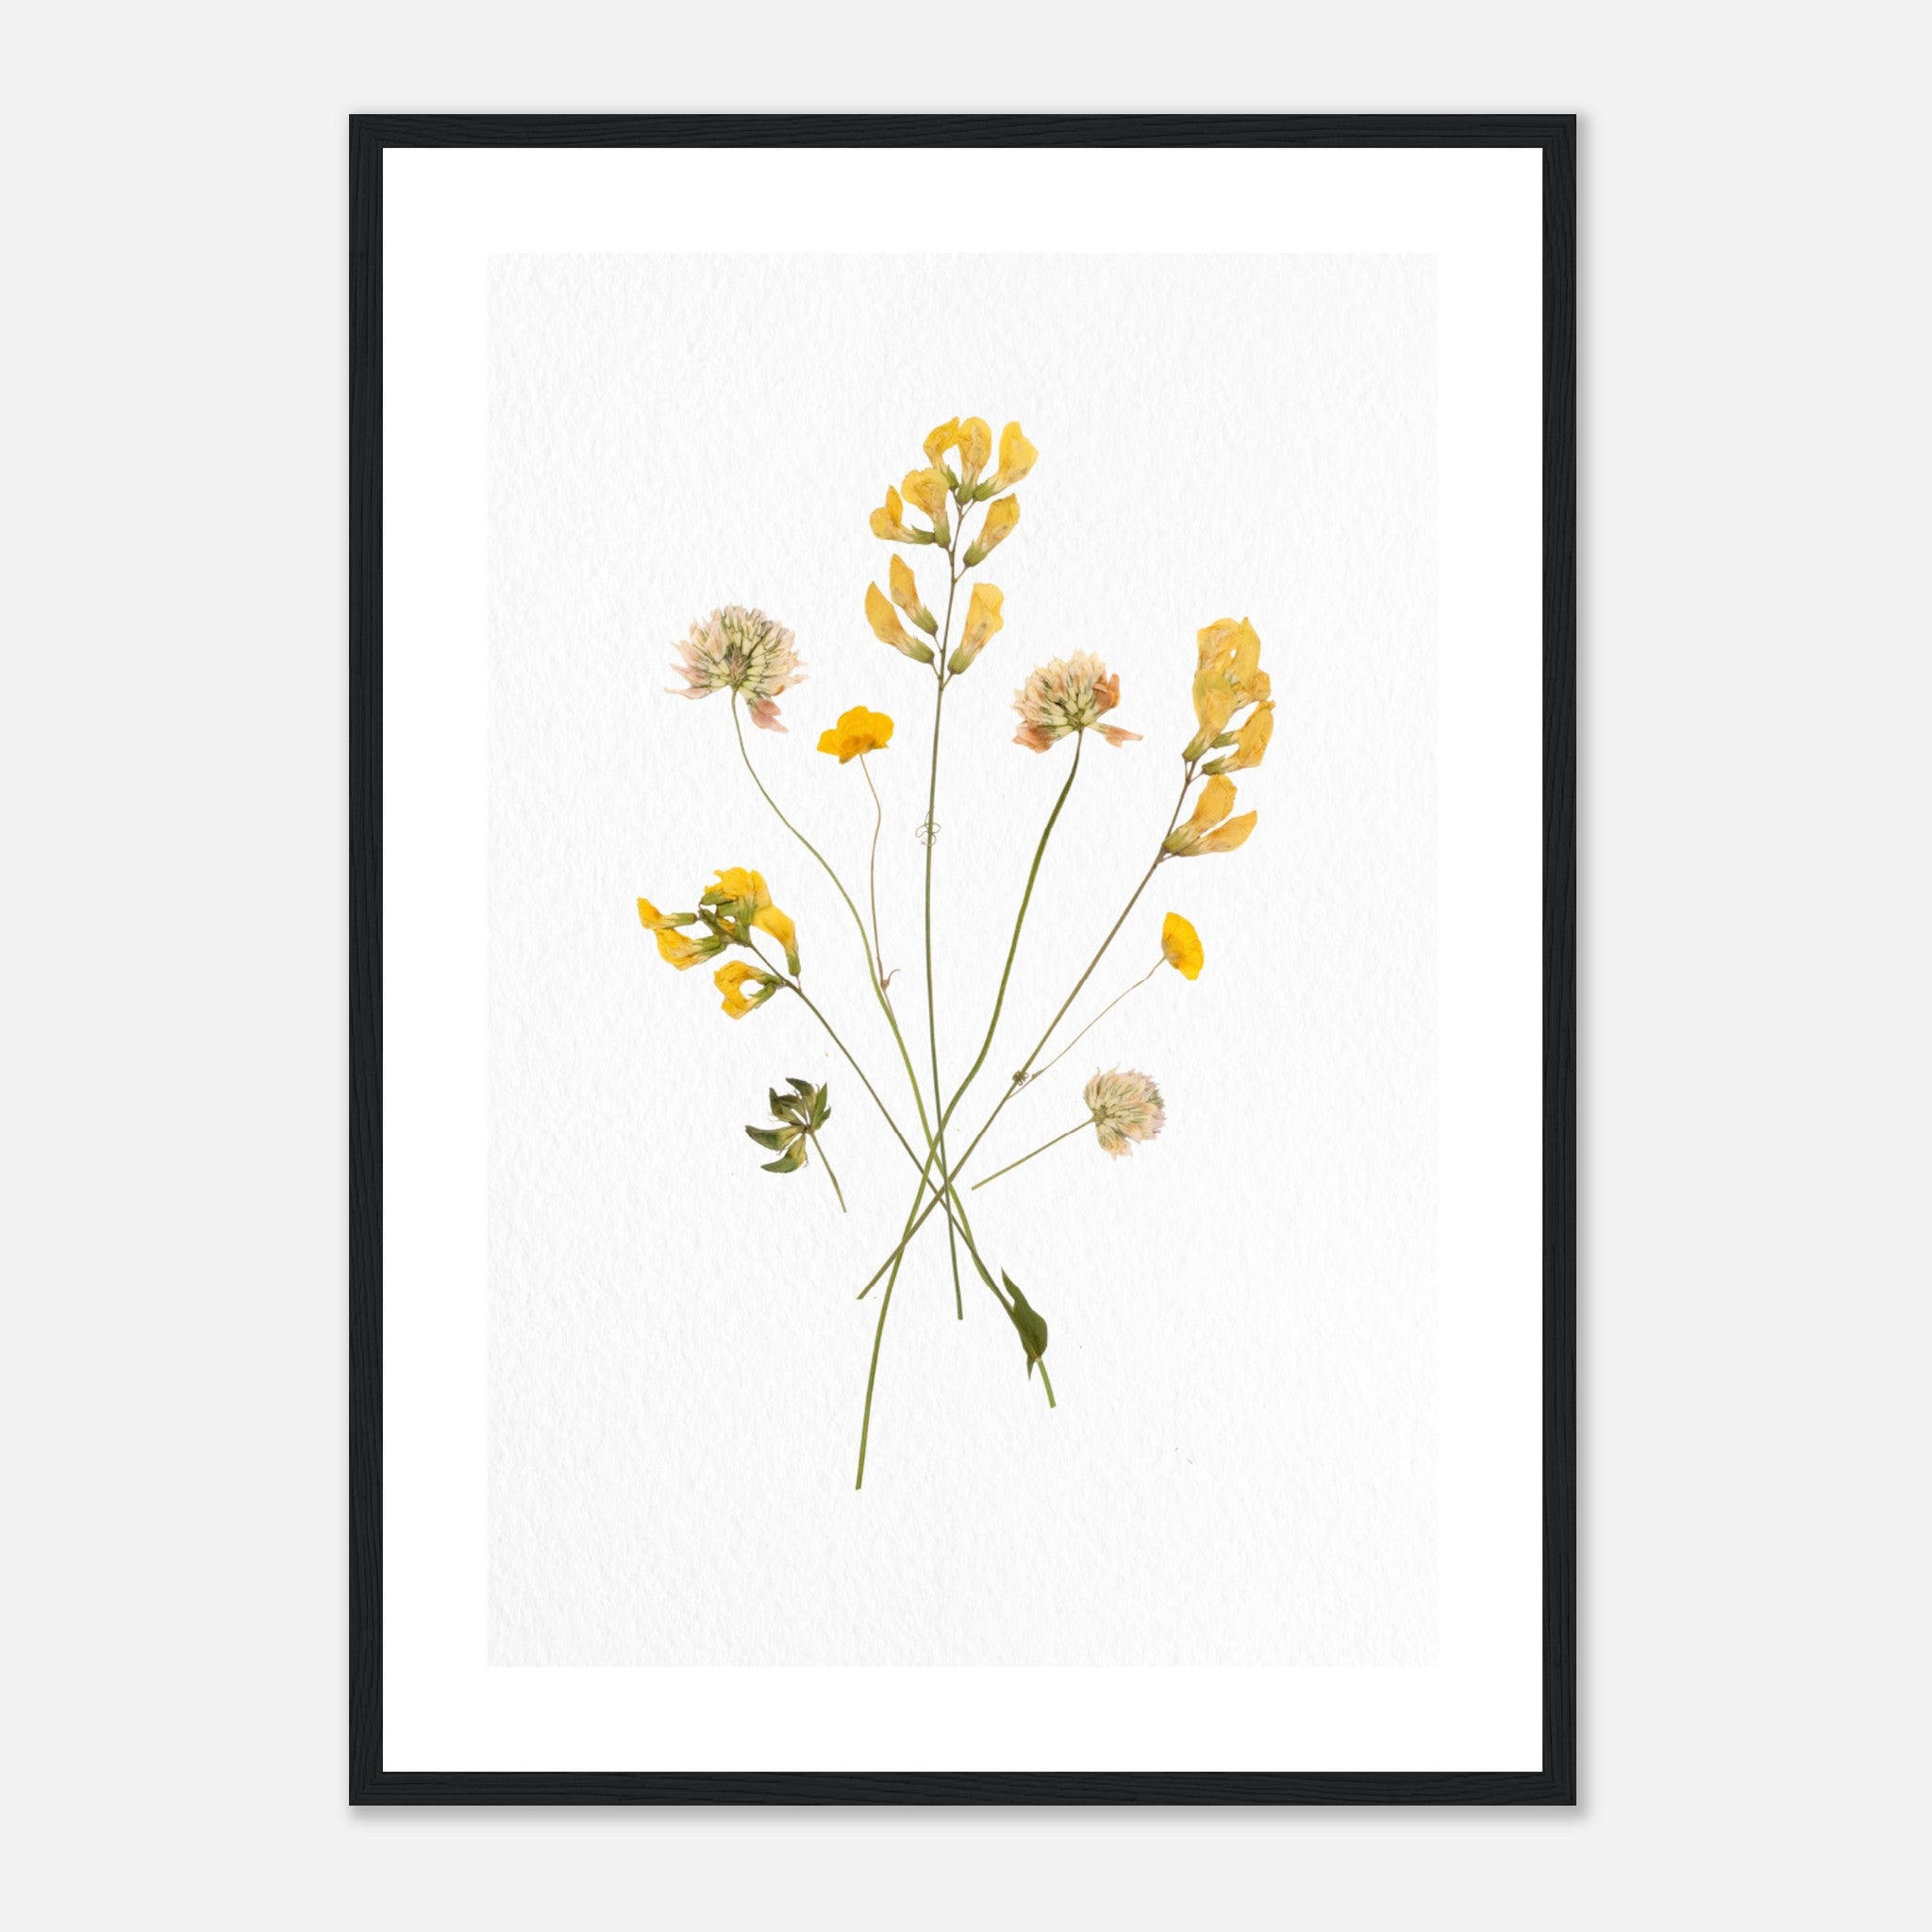 Dried Flowers On Textured Paper 5 Poster